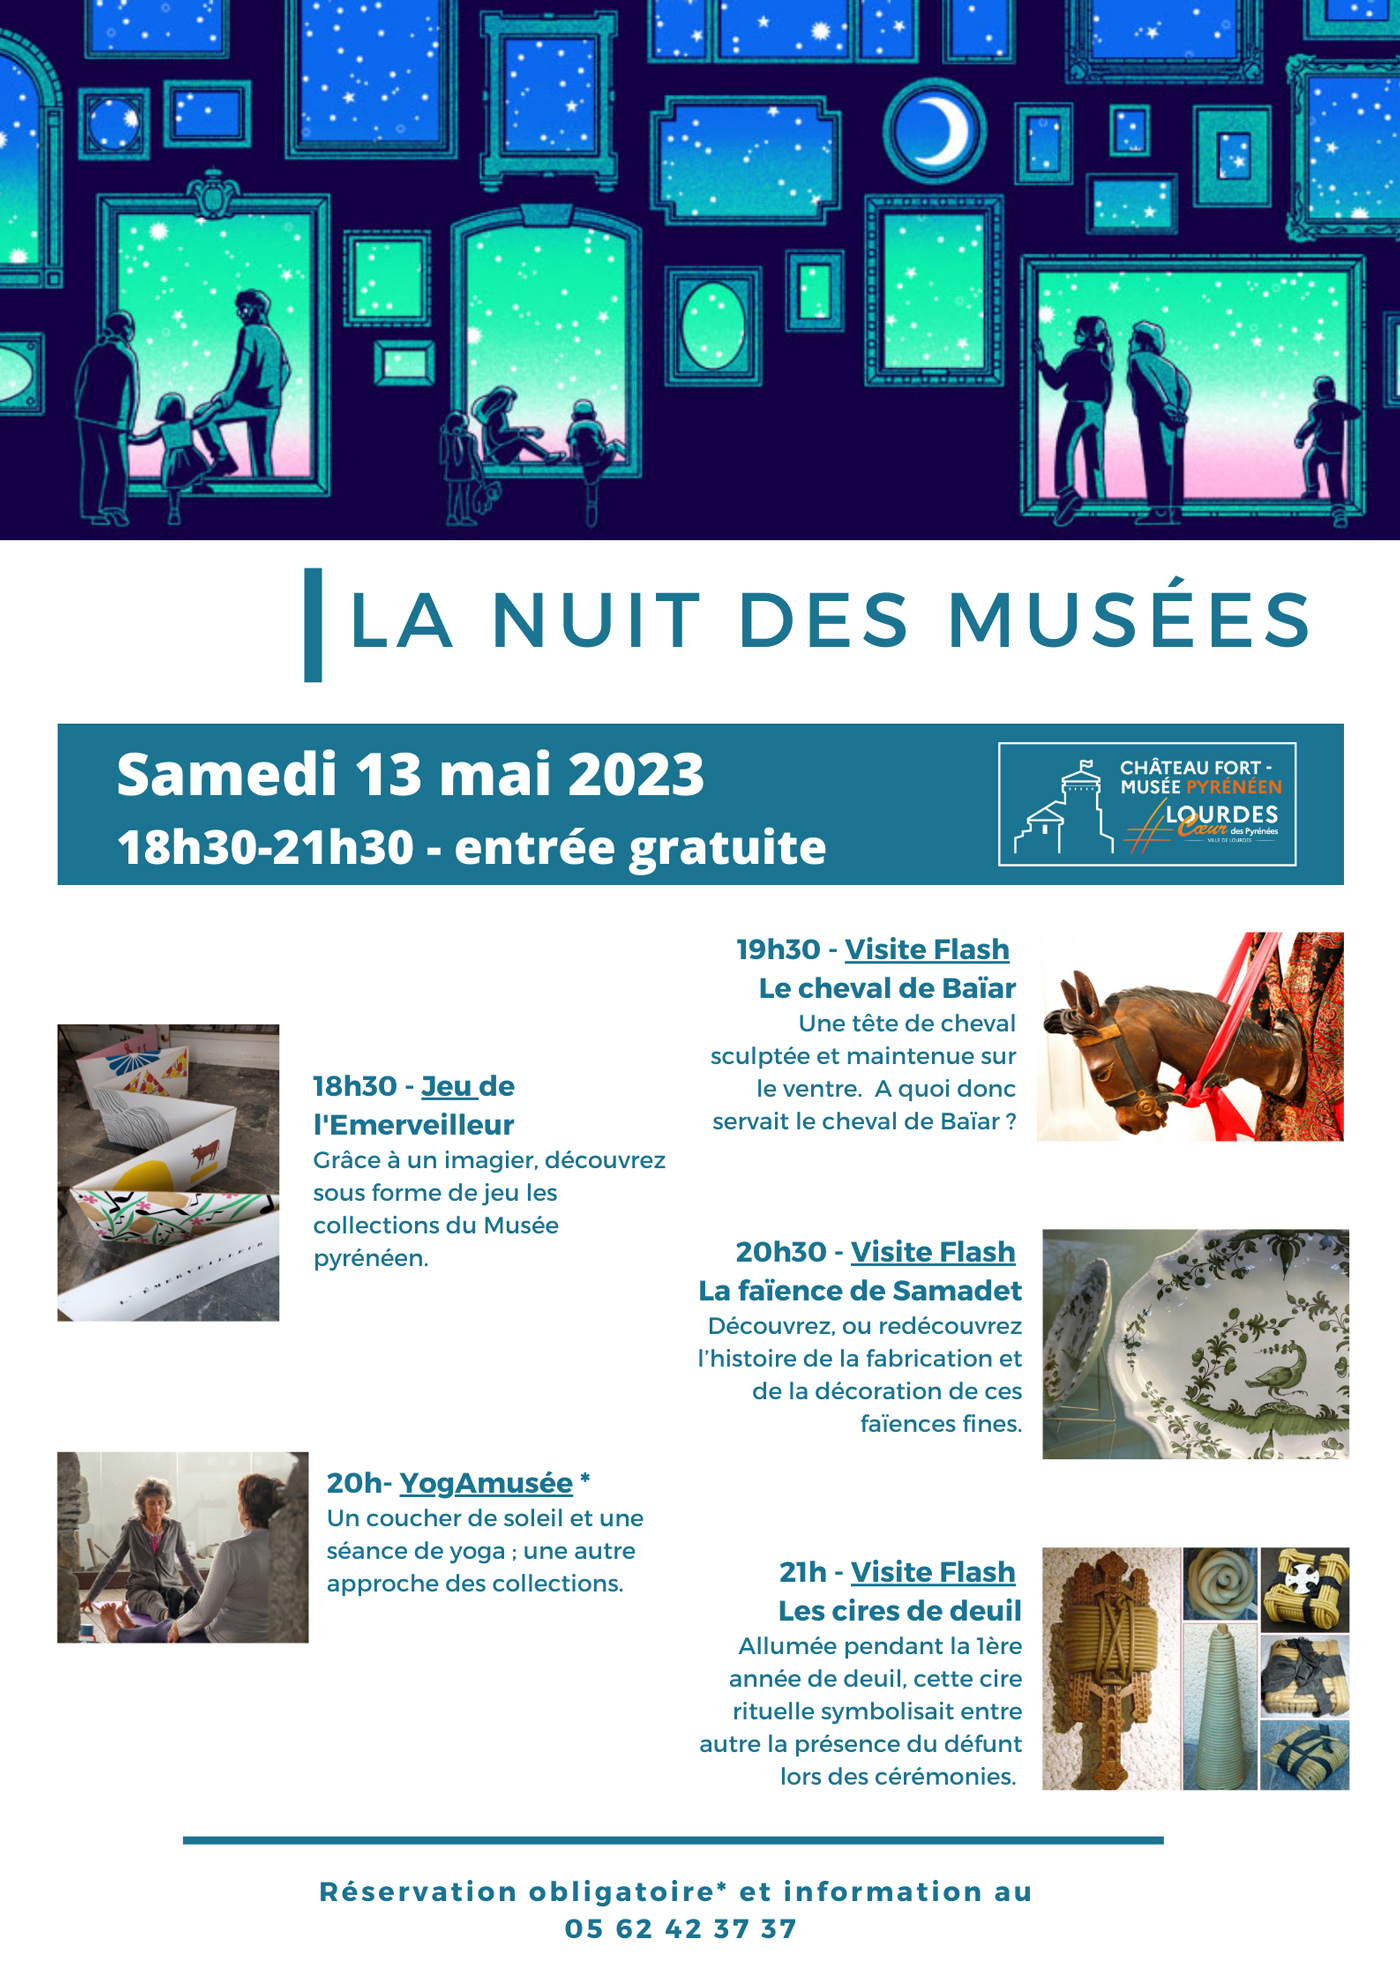 Nuit europeenne musees 2023 affiche